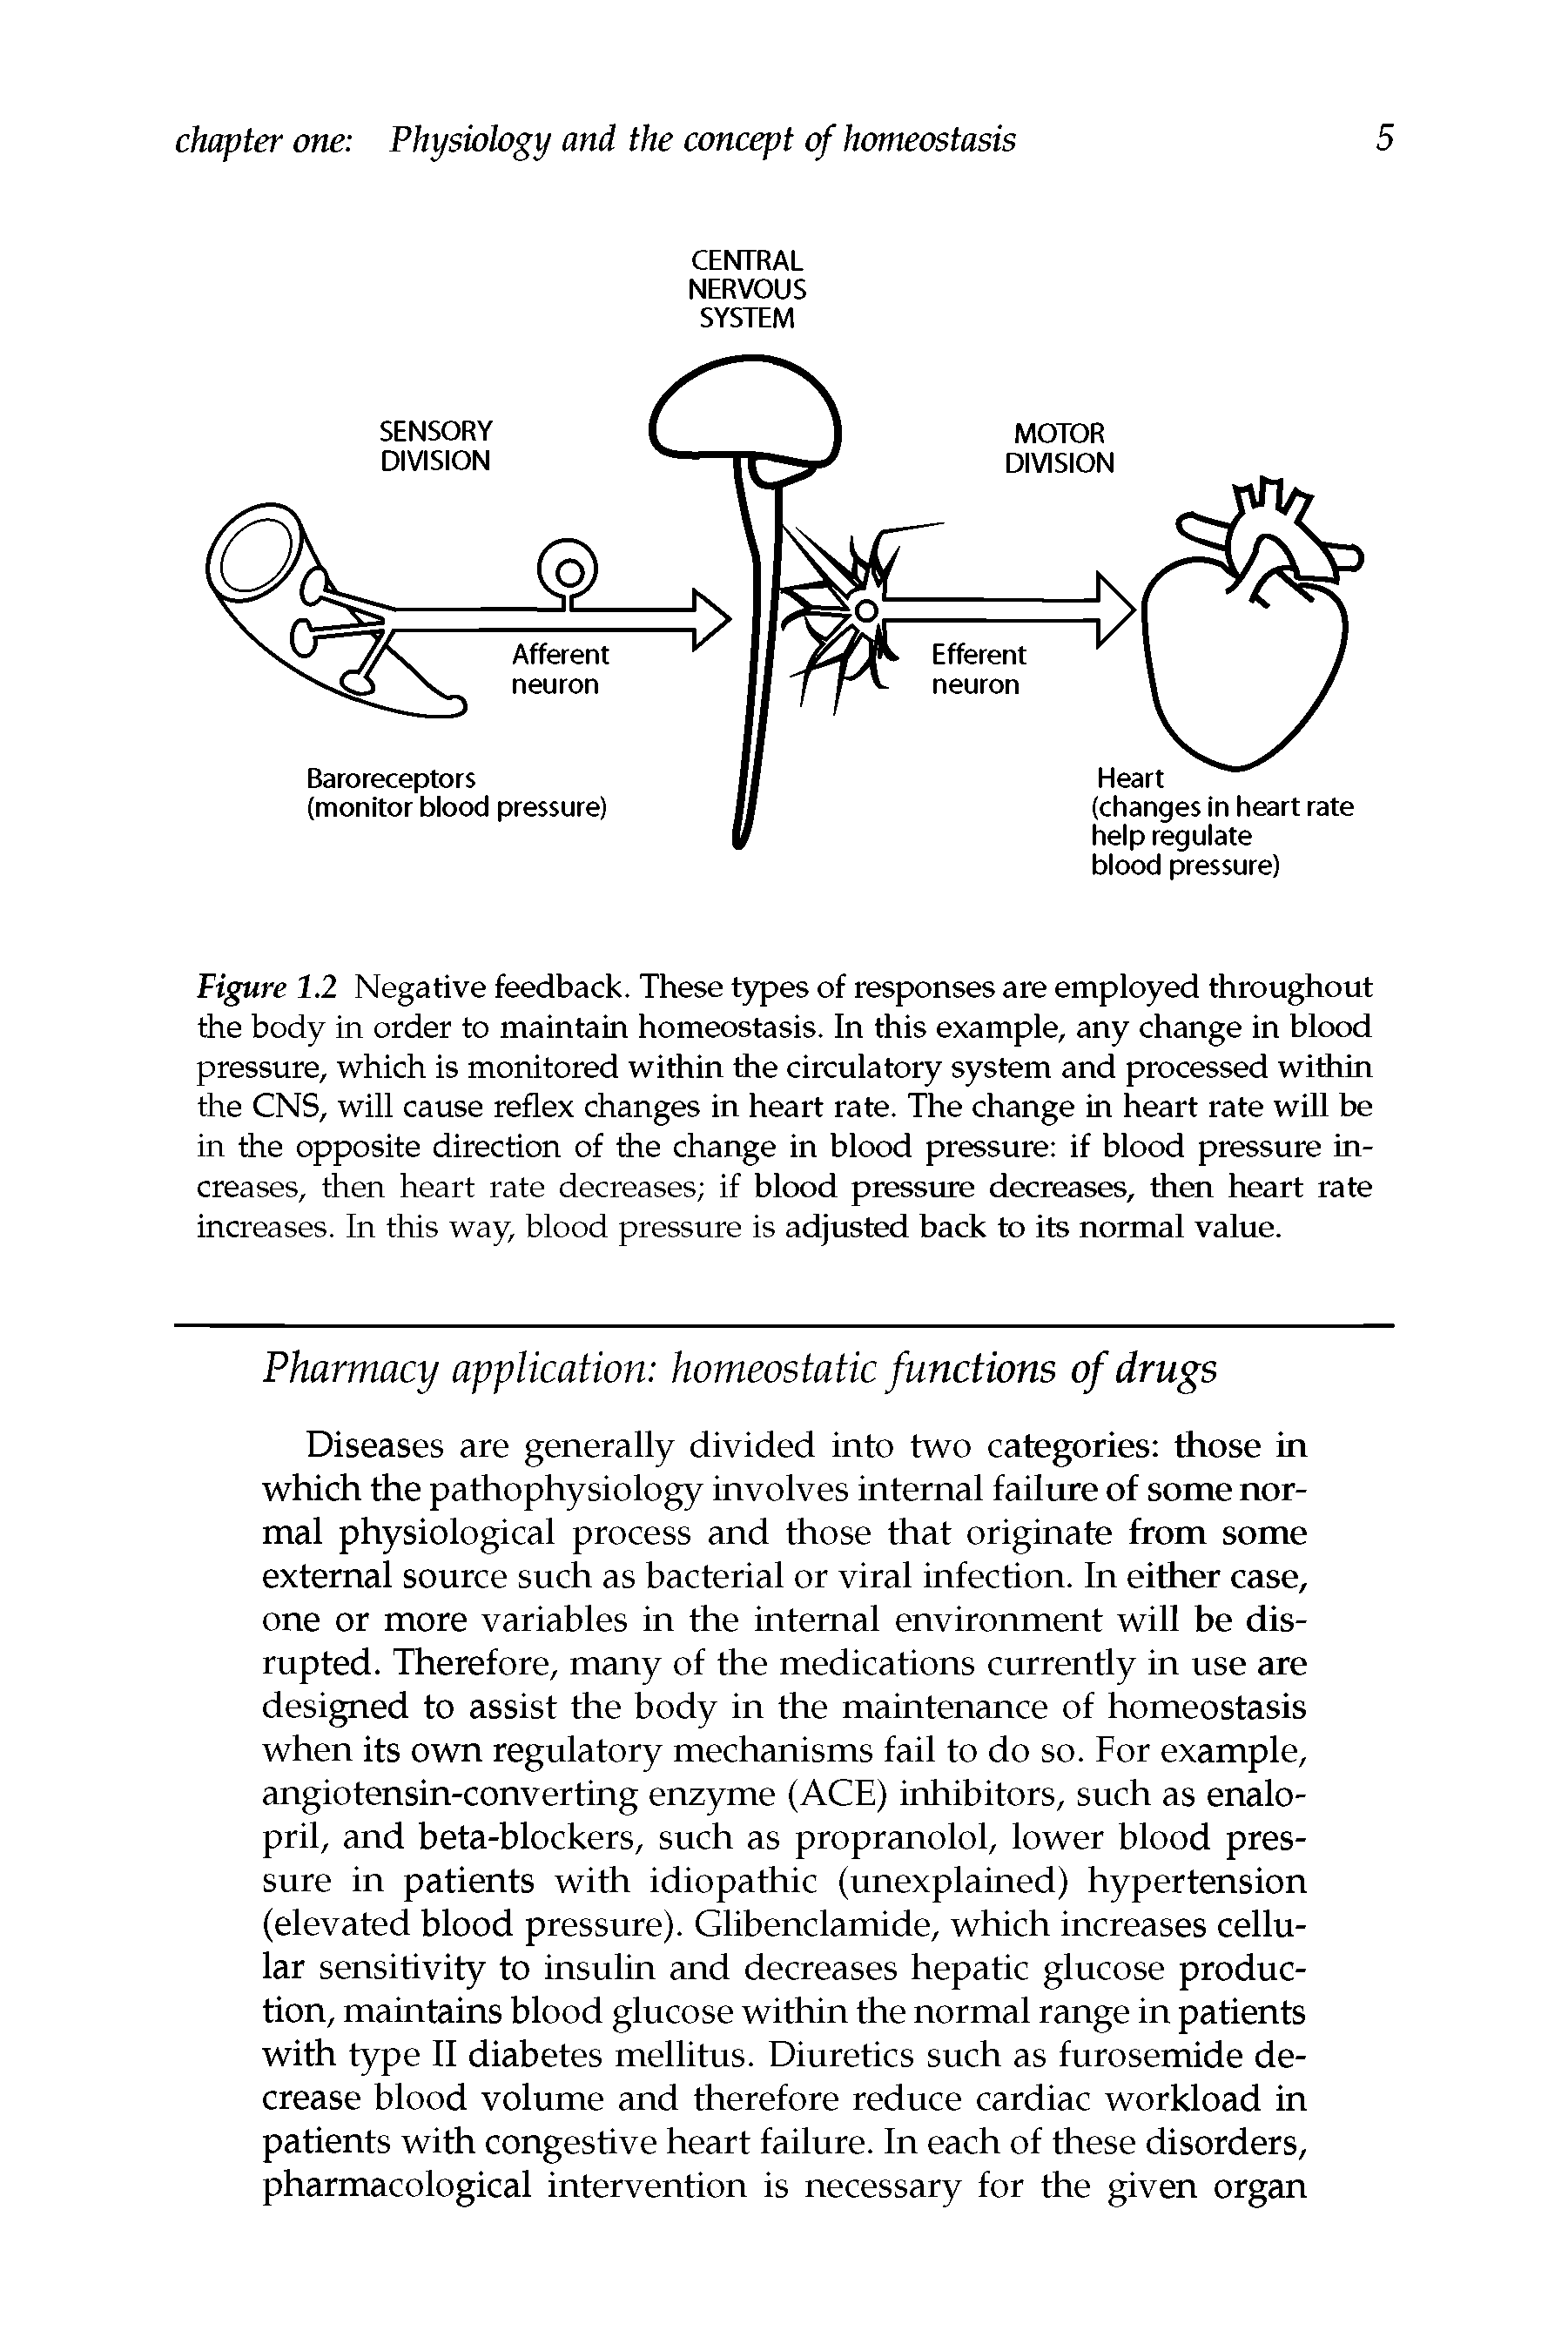 Figure 1.2 Negative feedback. These types of responses are employed throughout the body in order to maintain homeostasis. In this example, any change in blood pressure, which is monitored within the circulatory system and processed within the CNS, will cause reflex changes in heart rate. The change in heart rate will be in the opposite direction of the change in blood pressure if blood pressure increases, then heart rate decreases if blood pressure decreases, then heart rate increases. In this way, blood pressure is adjusted back to its normal value.